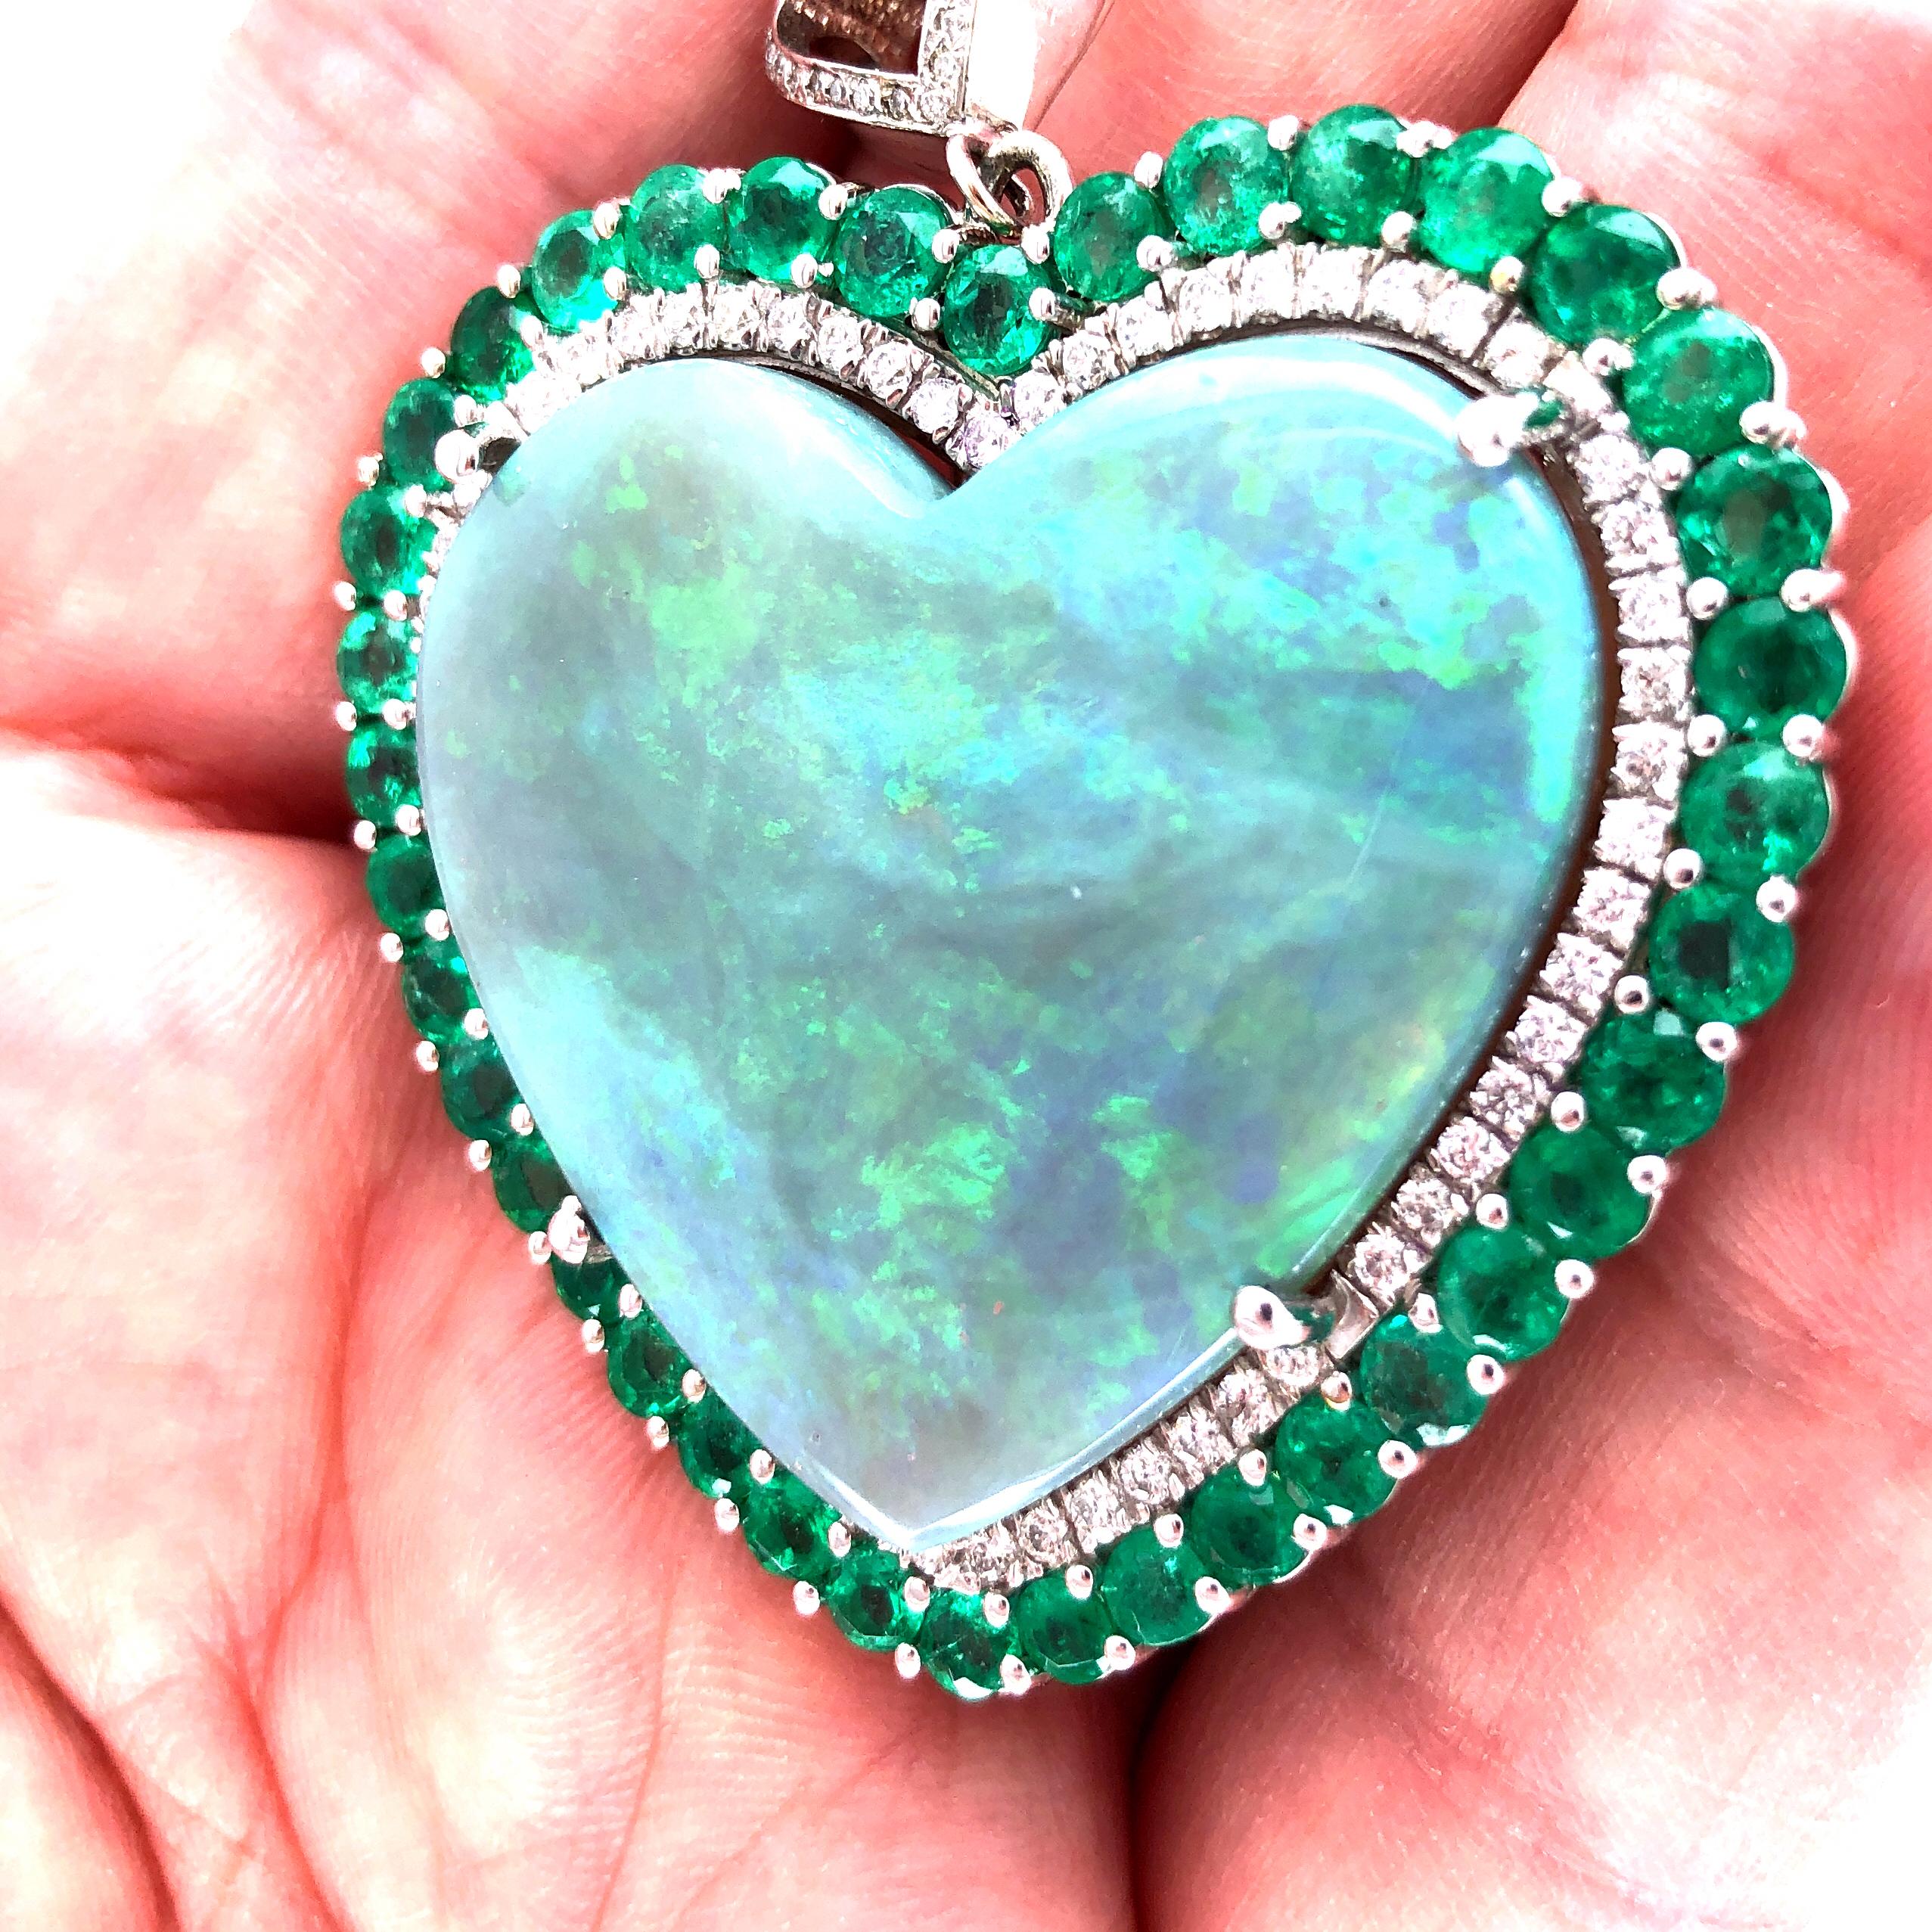 Offered here is a rare natural earth mined hearth shaped Black Opal, weighing 65 carats.
Opal is set within a halo set with natural earth mined diamonds then again framed with natural earth mined green Colombian emeralds.
Diamonds: sparkly bright